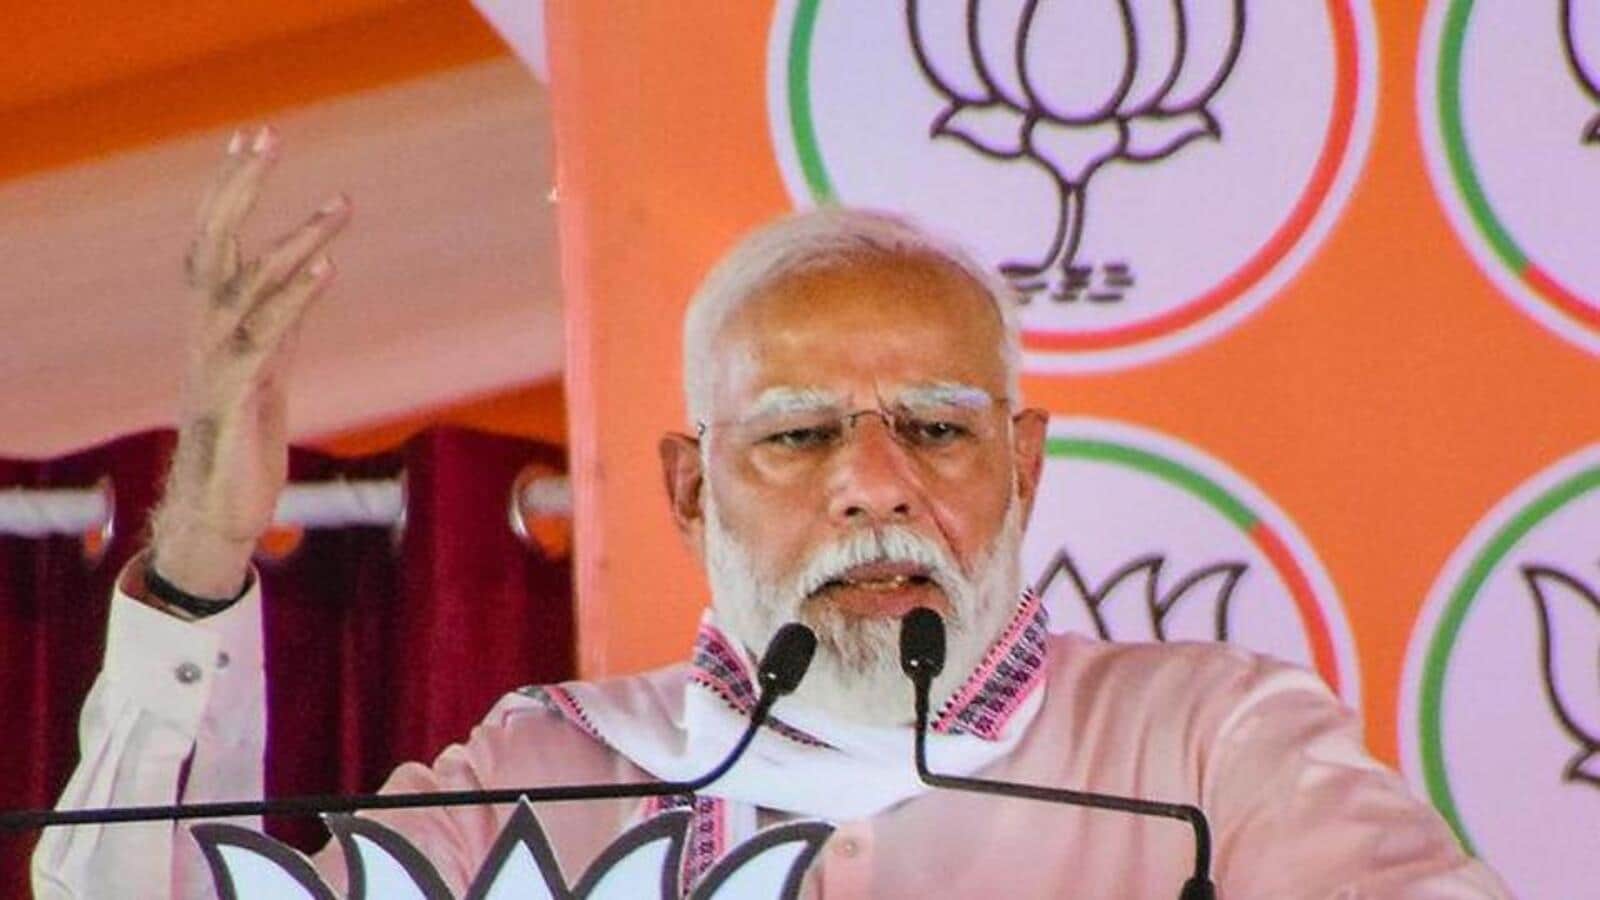 Congress wants to snatch OBC rights with religion-based quota: PM Modi in Agra